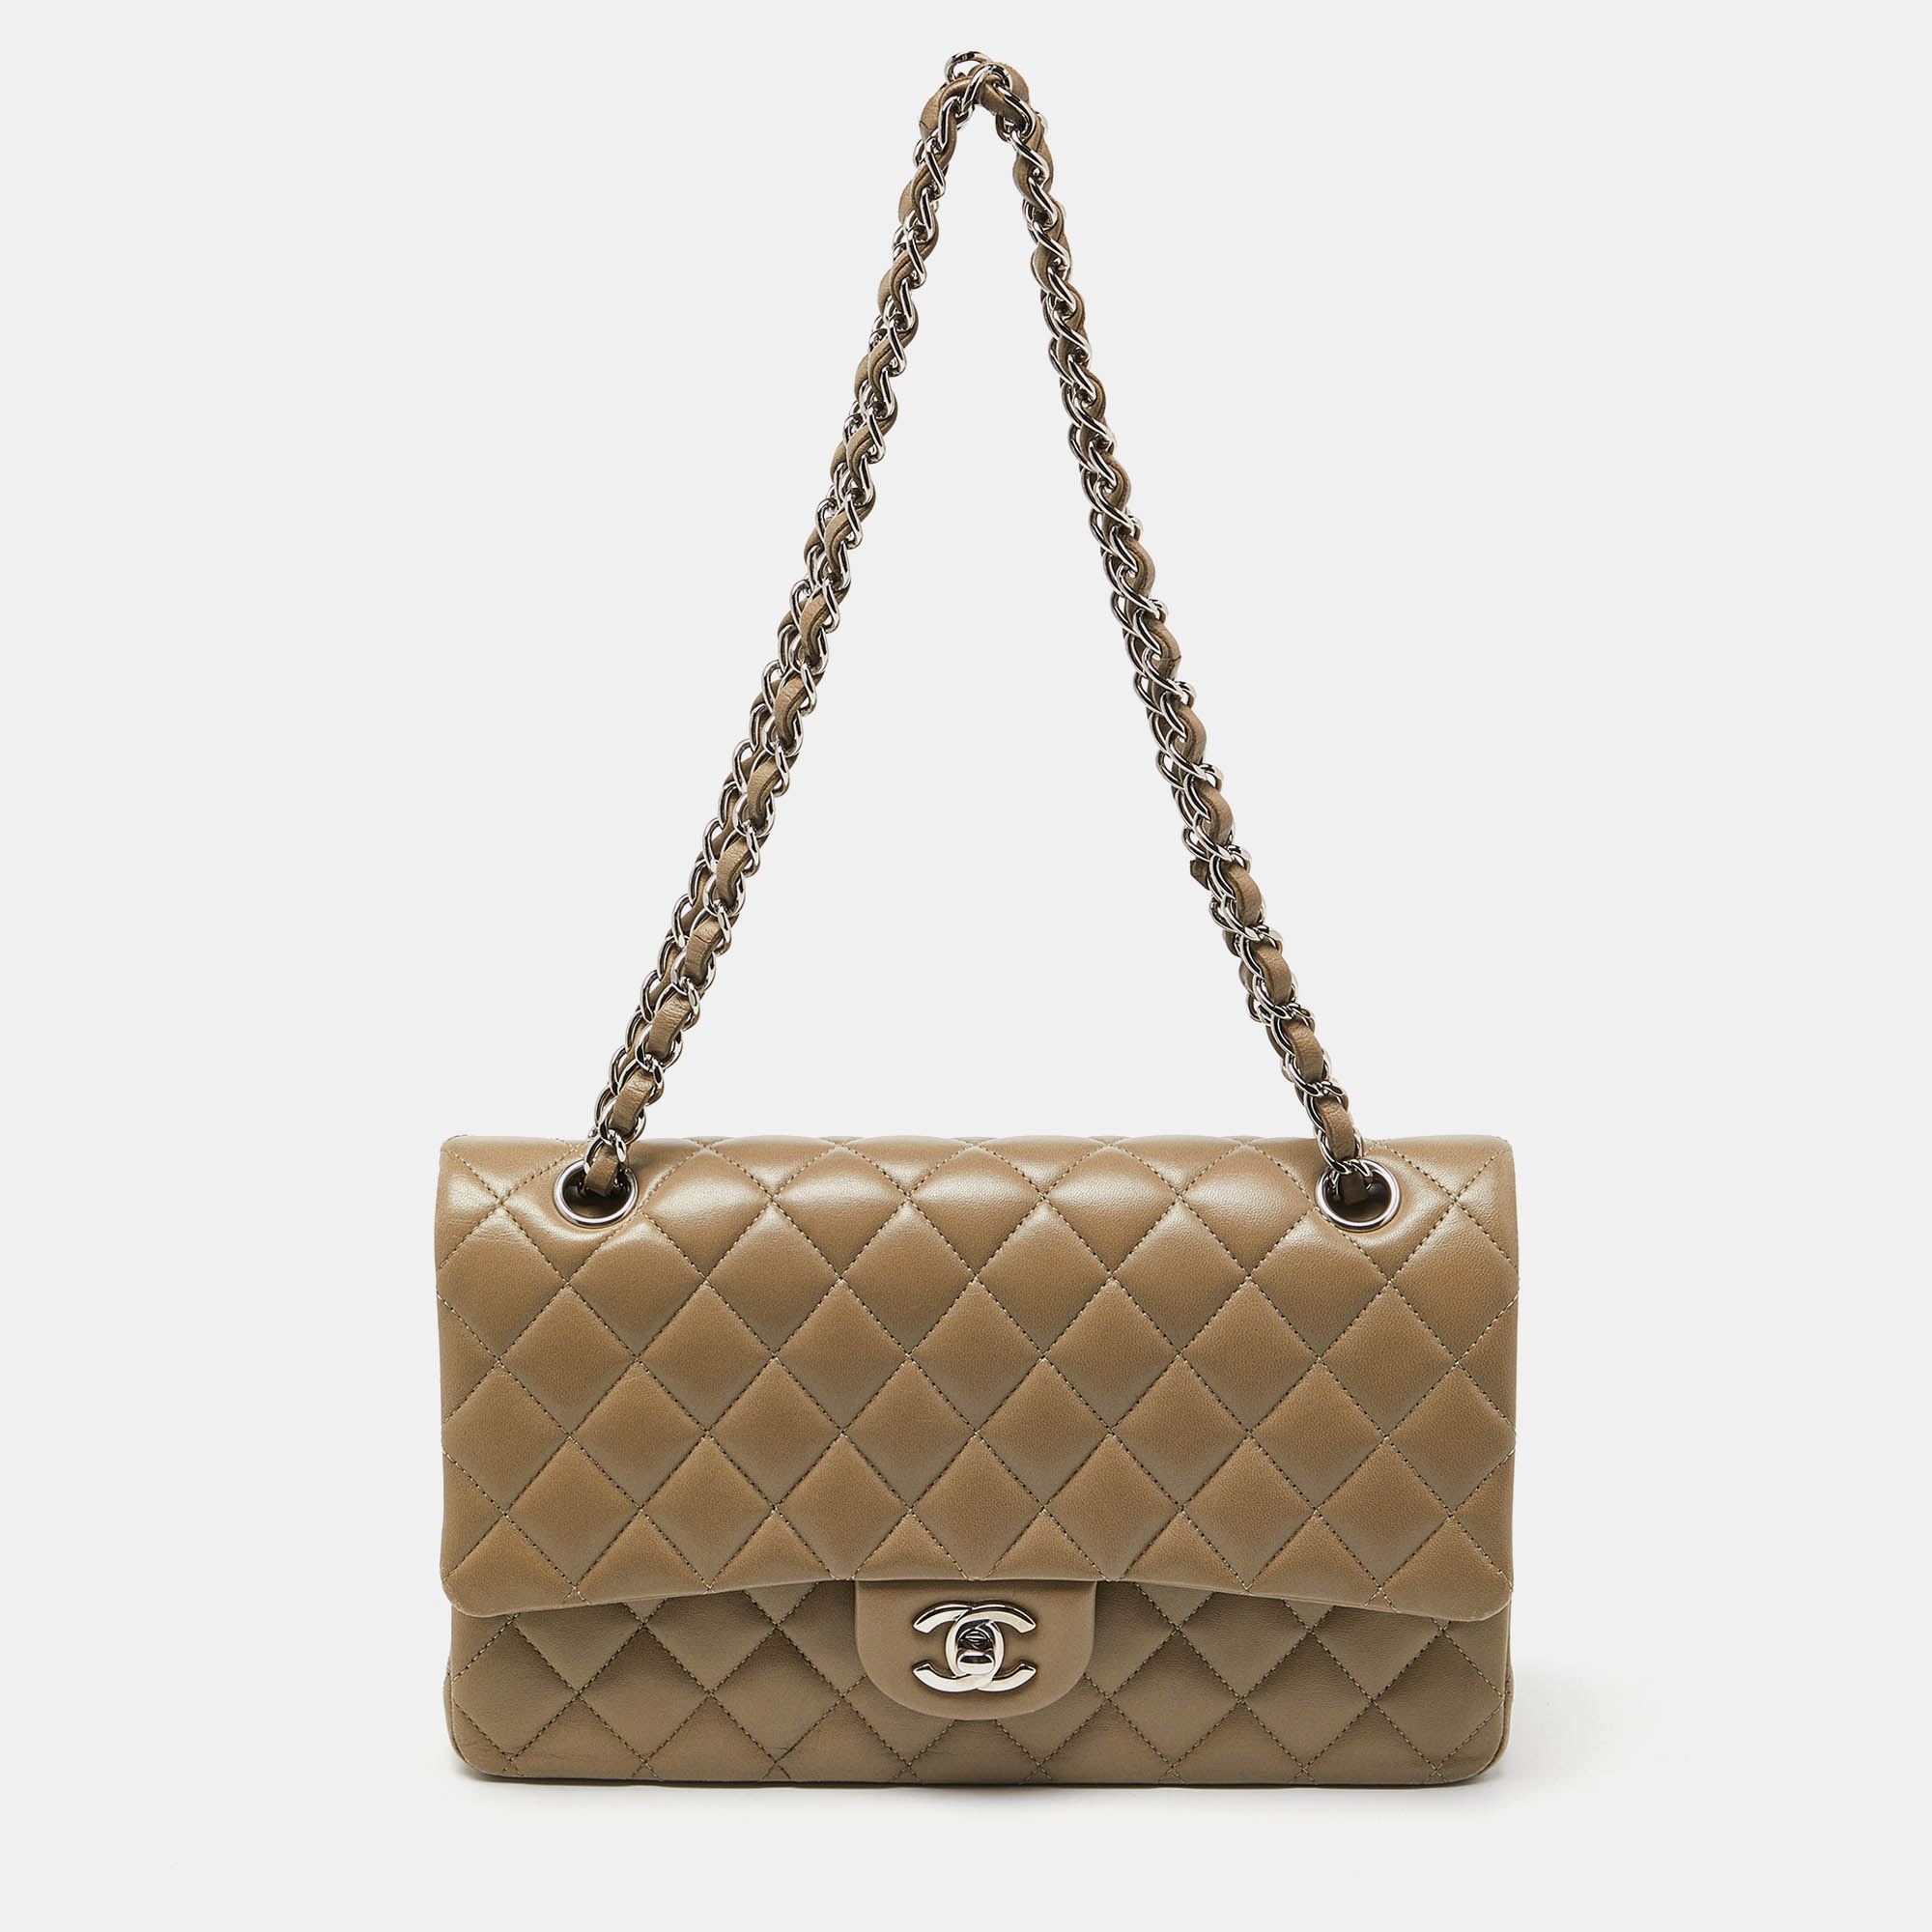 Chanel avocado green quilted leather medium classic double flap bag